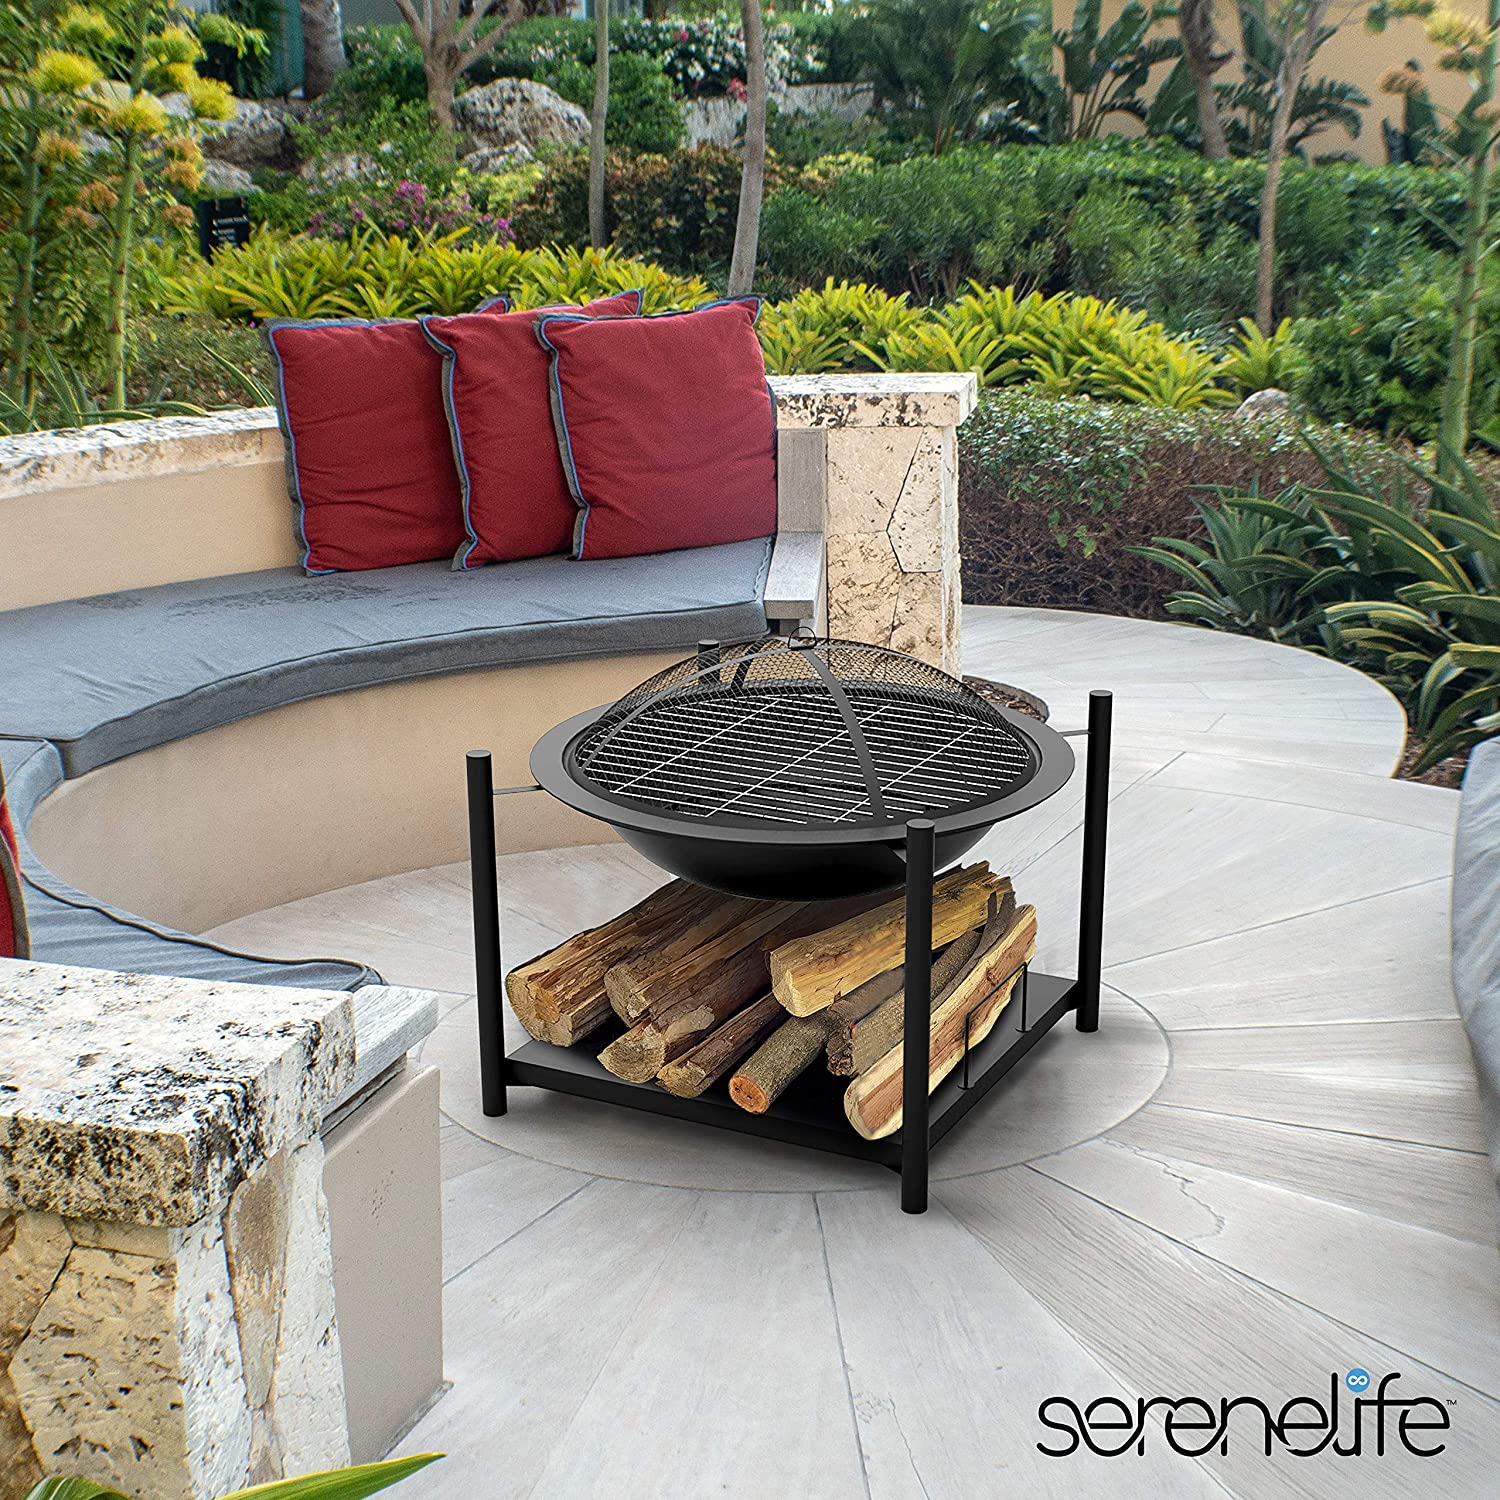 serenelife SLCARFP54 Outdoor Wood Fire Pit User Manual